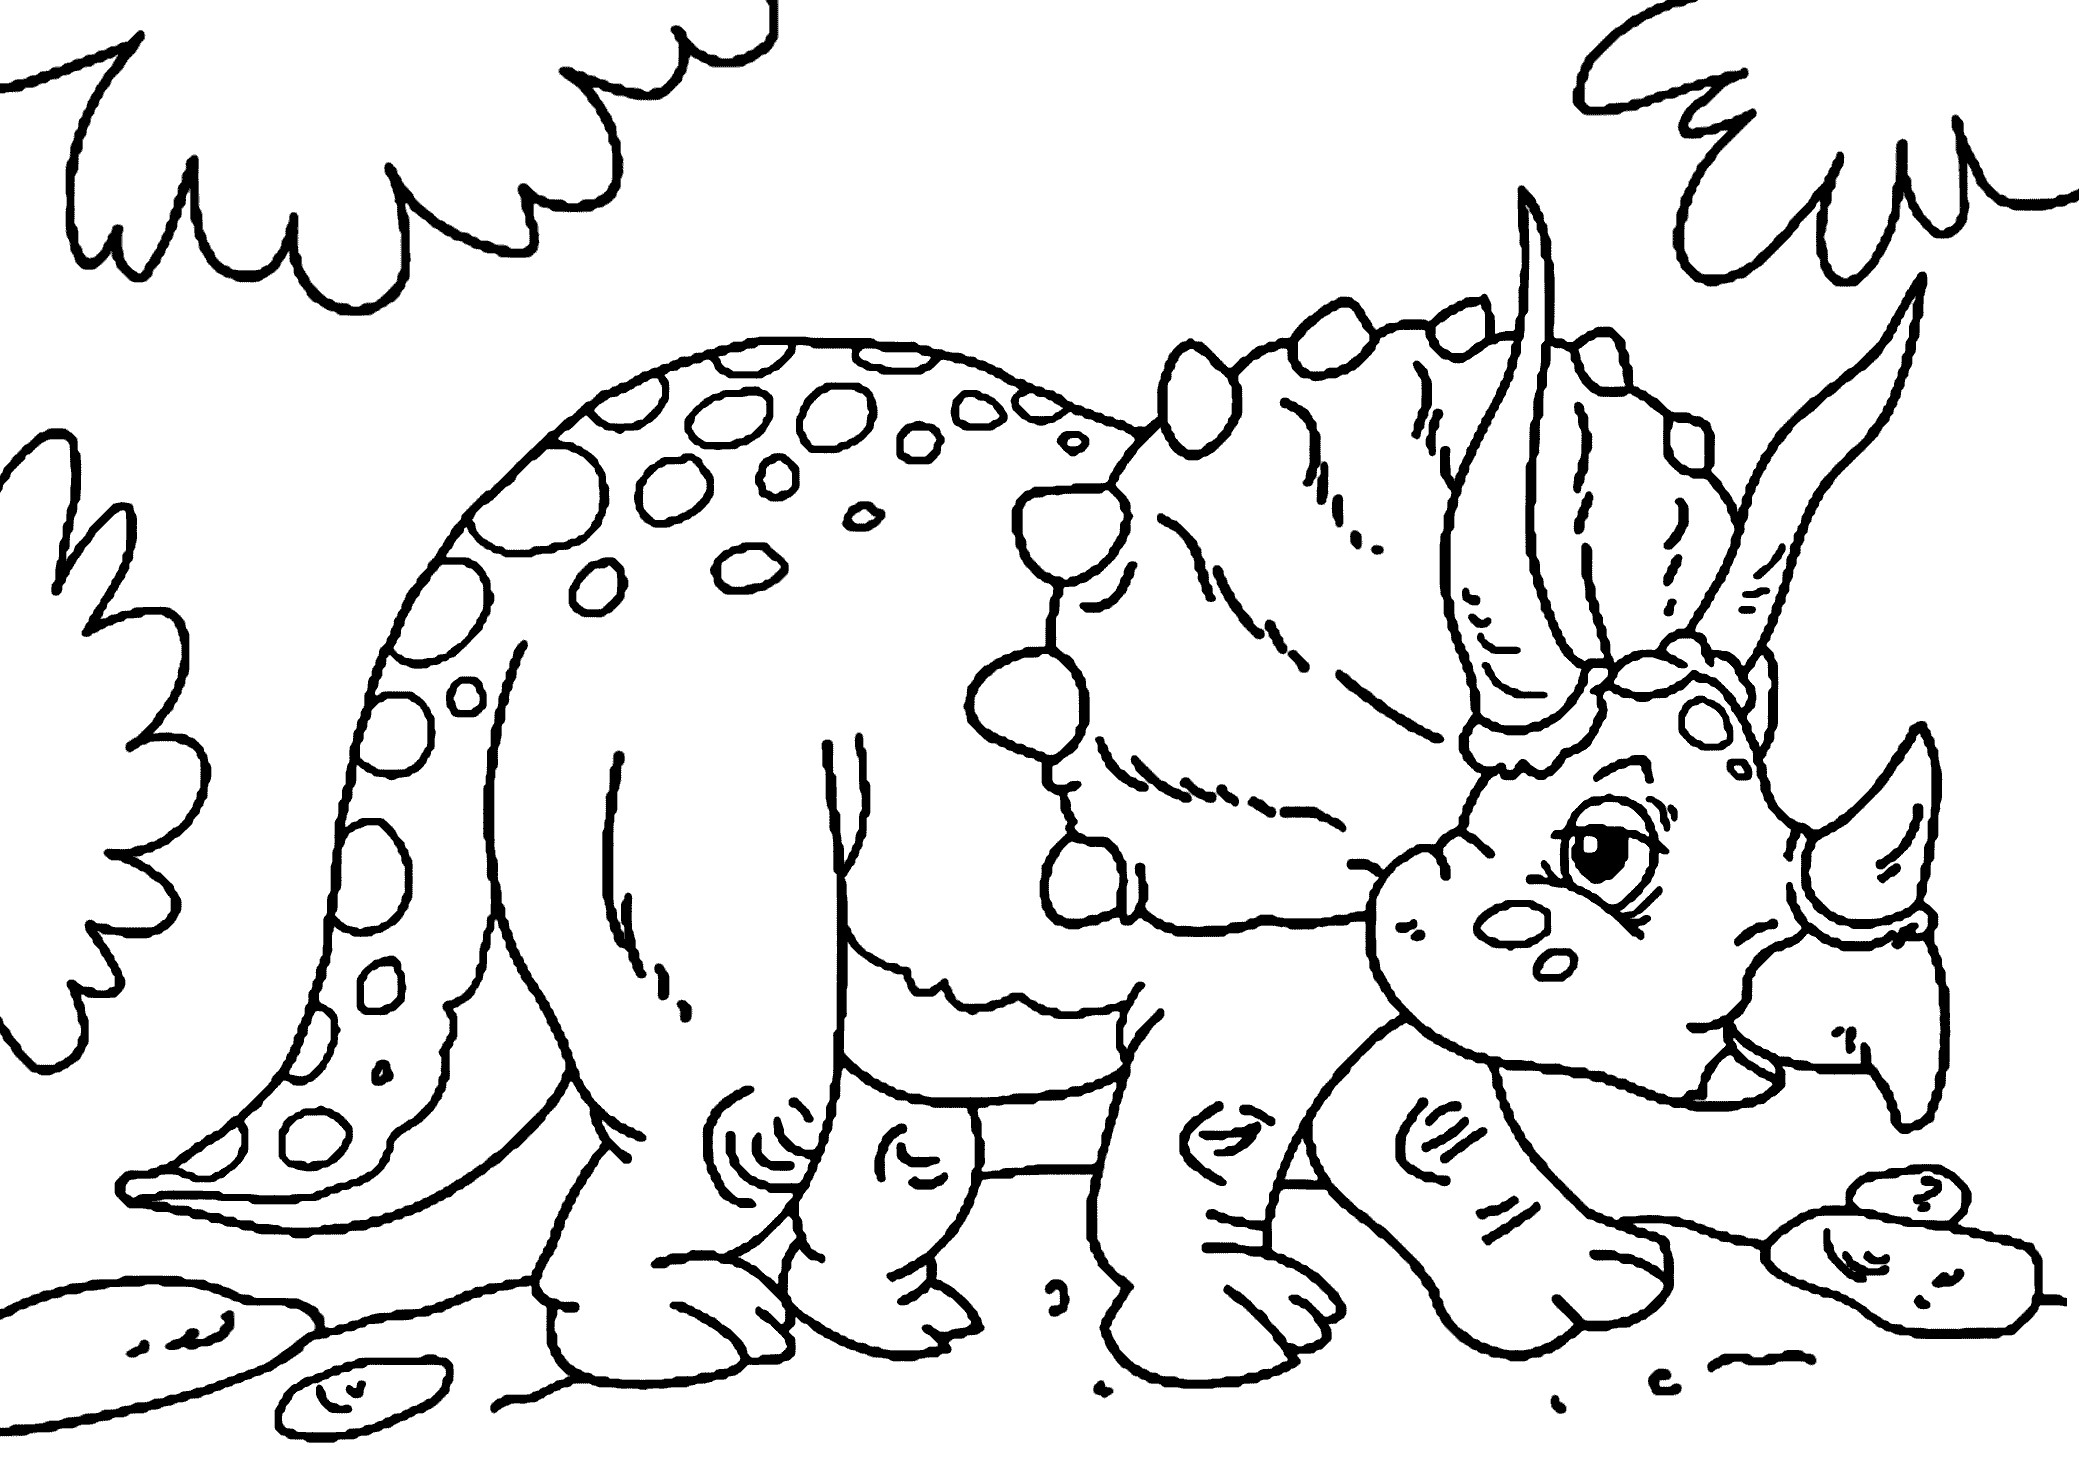 Dinosaur Coloring Pages For Toddlers
 Cute little triceratops dinosaur coloring pages for kids